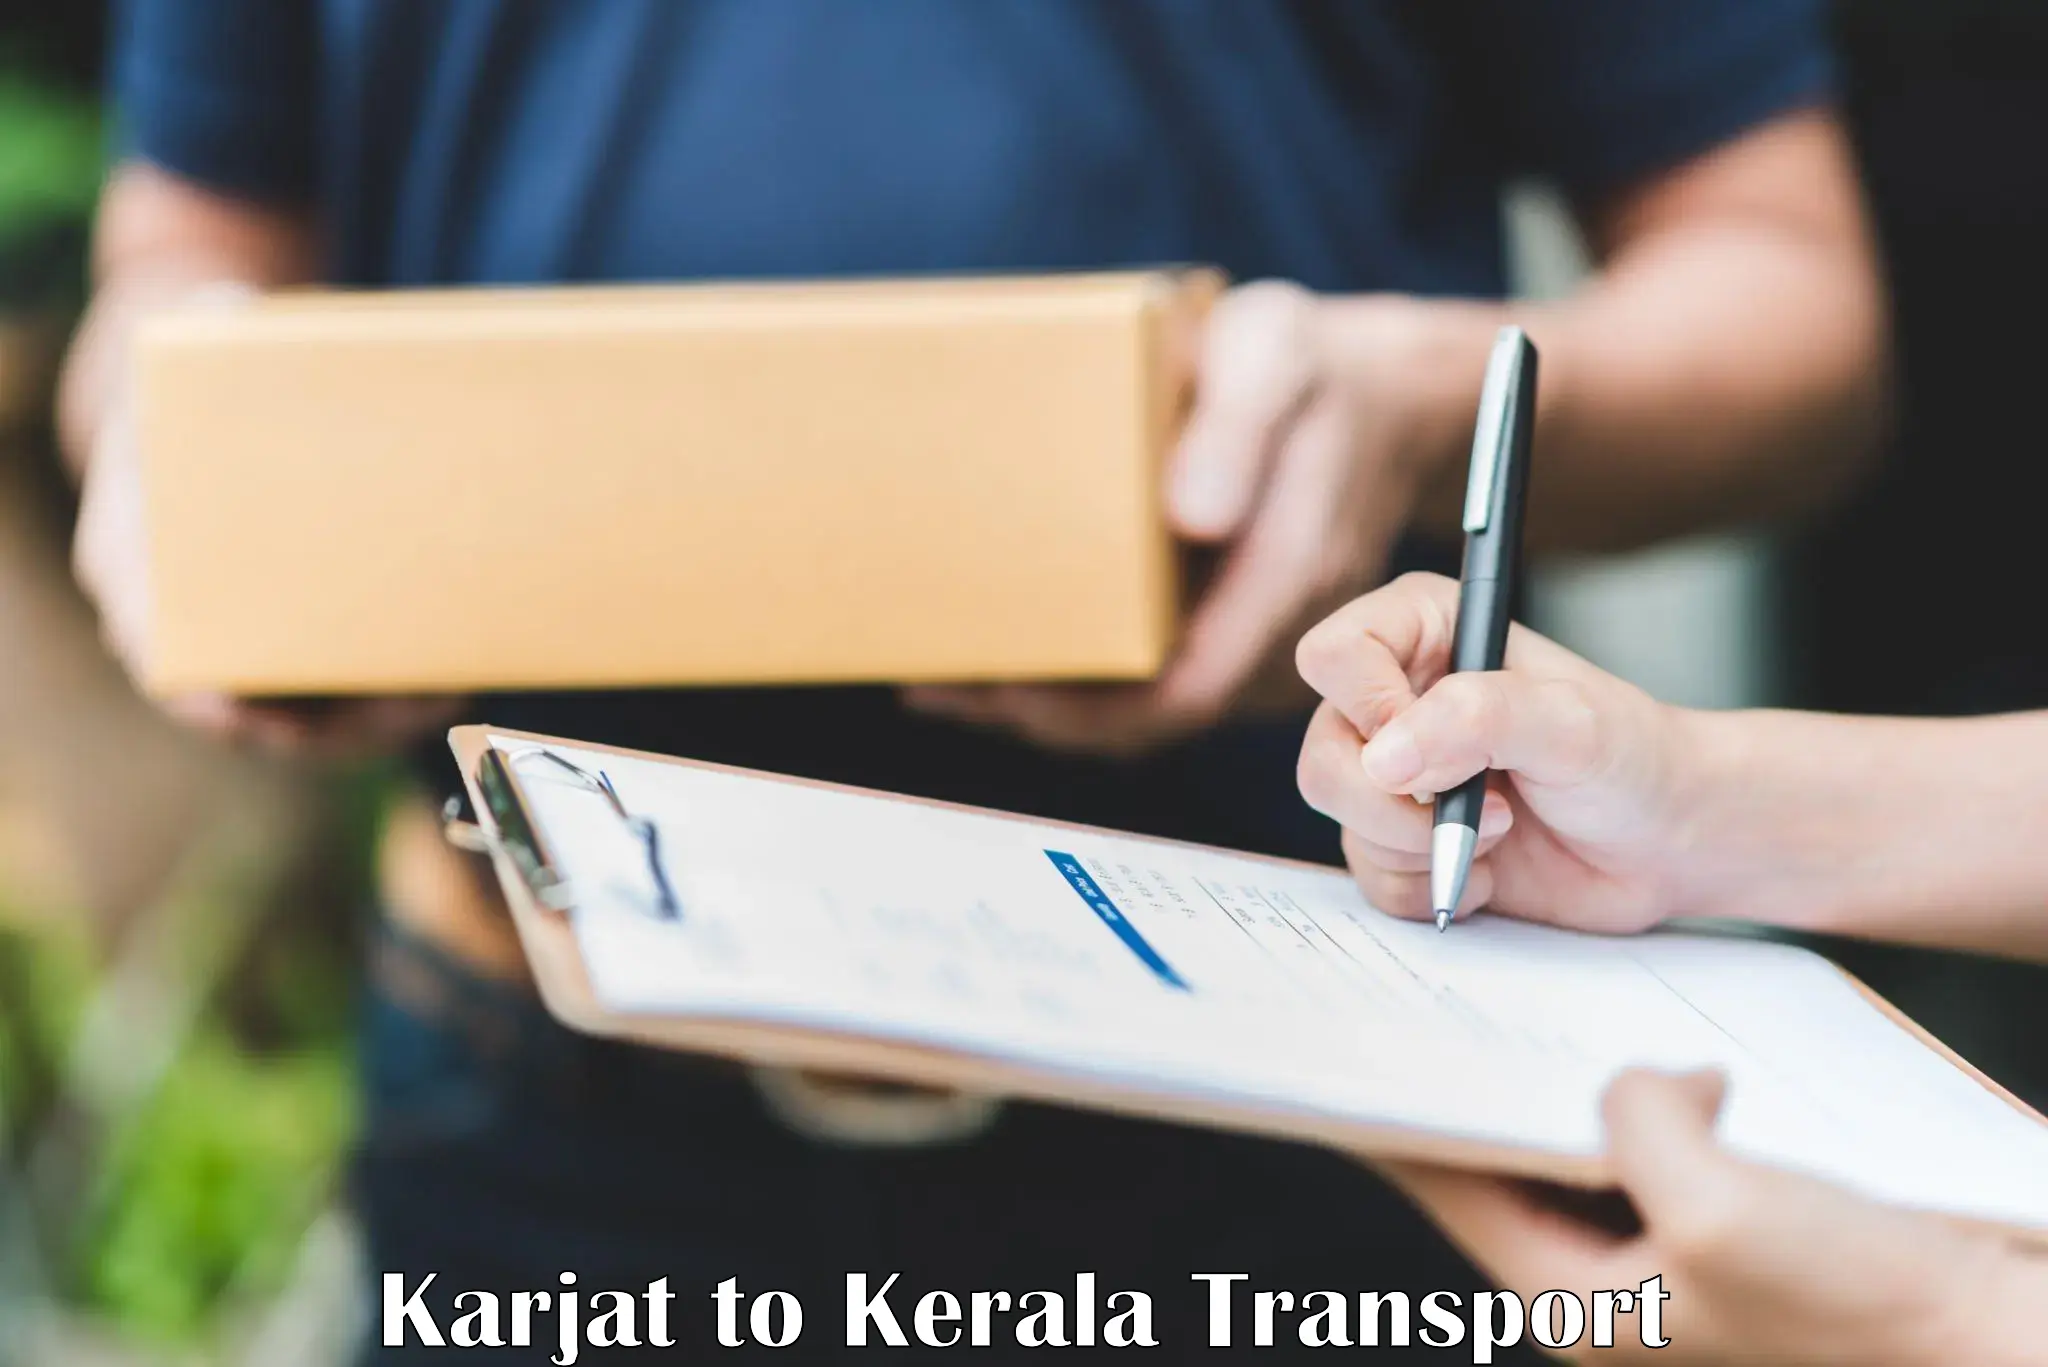 Domestic transport services Karjat to Cochin University of Science and Technology